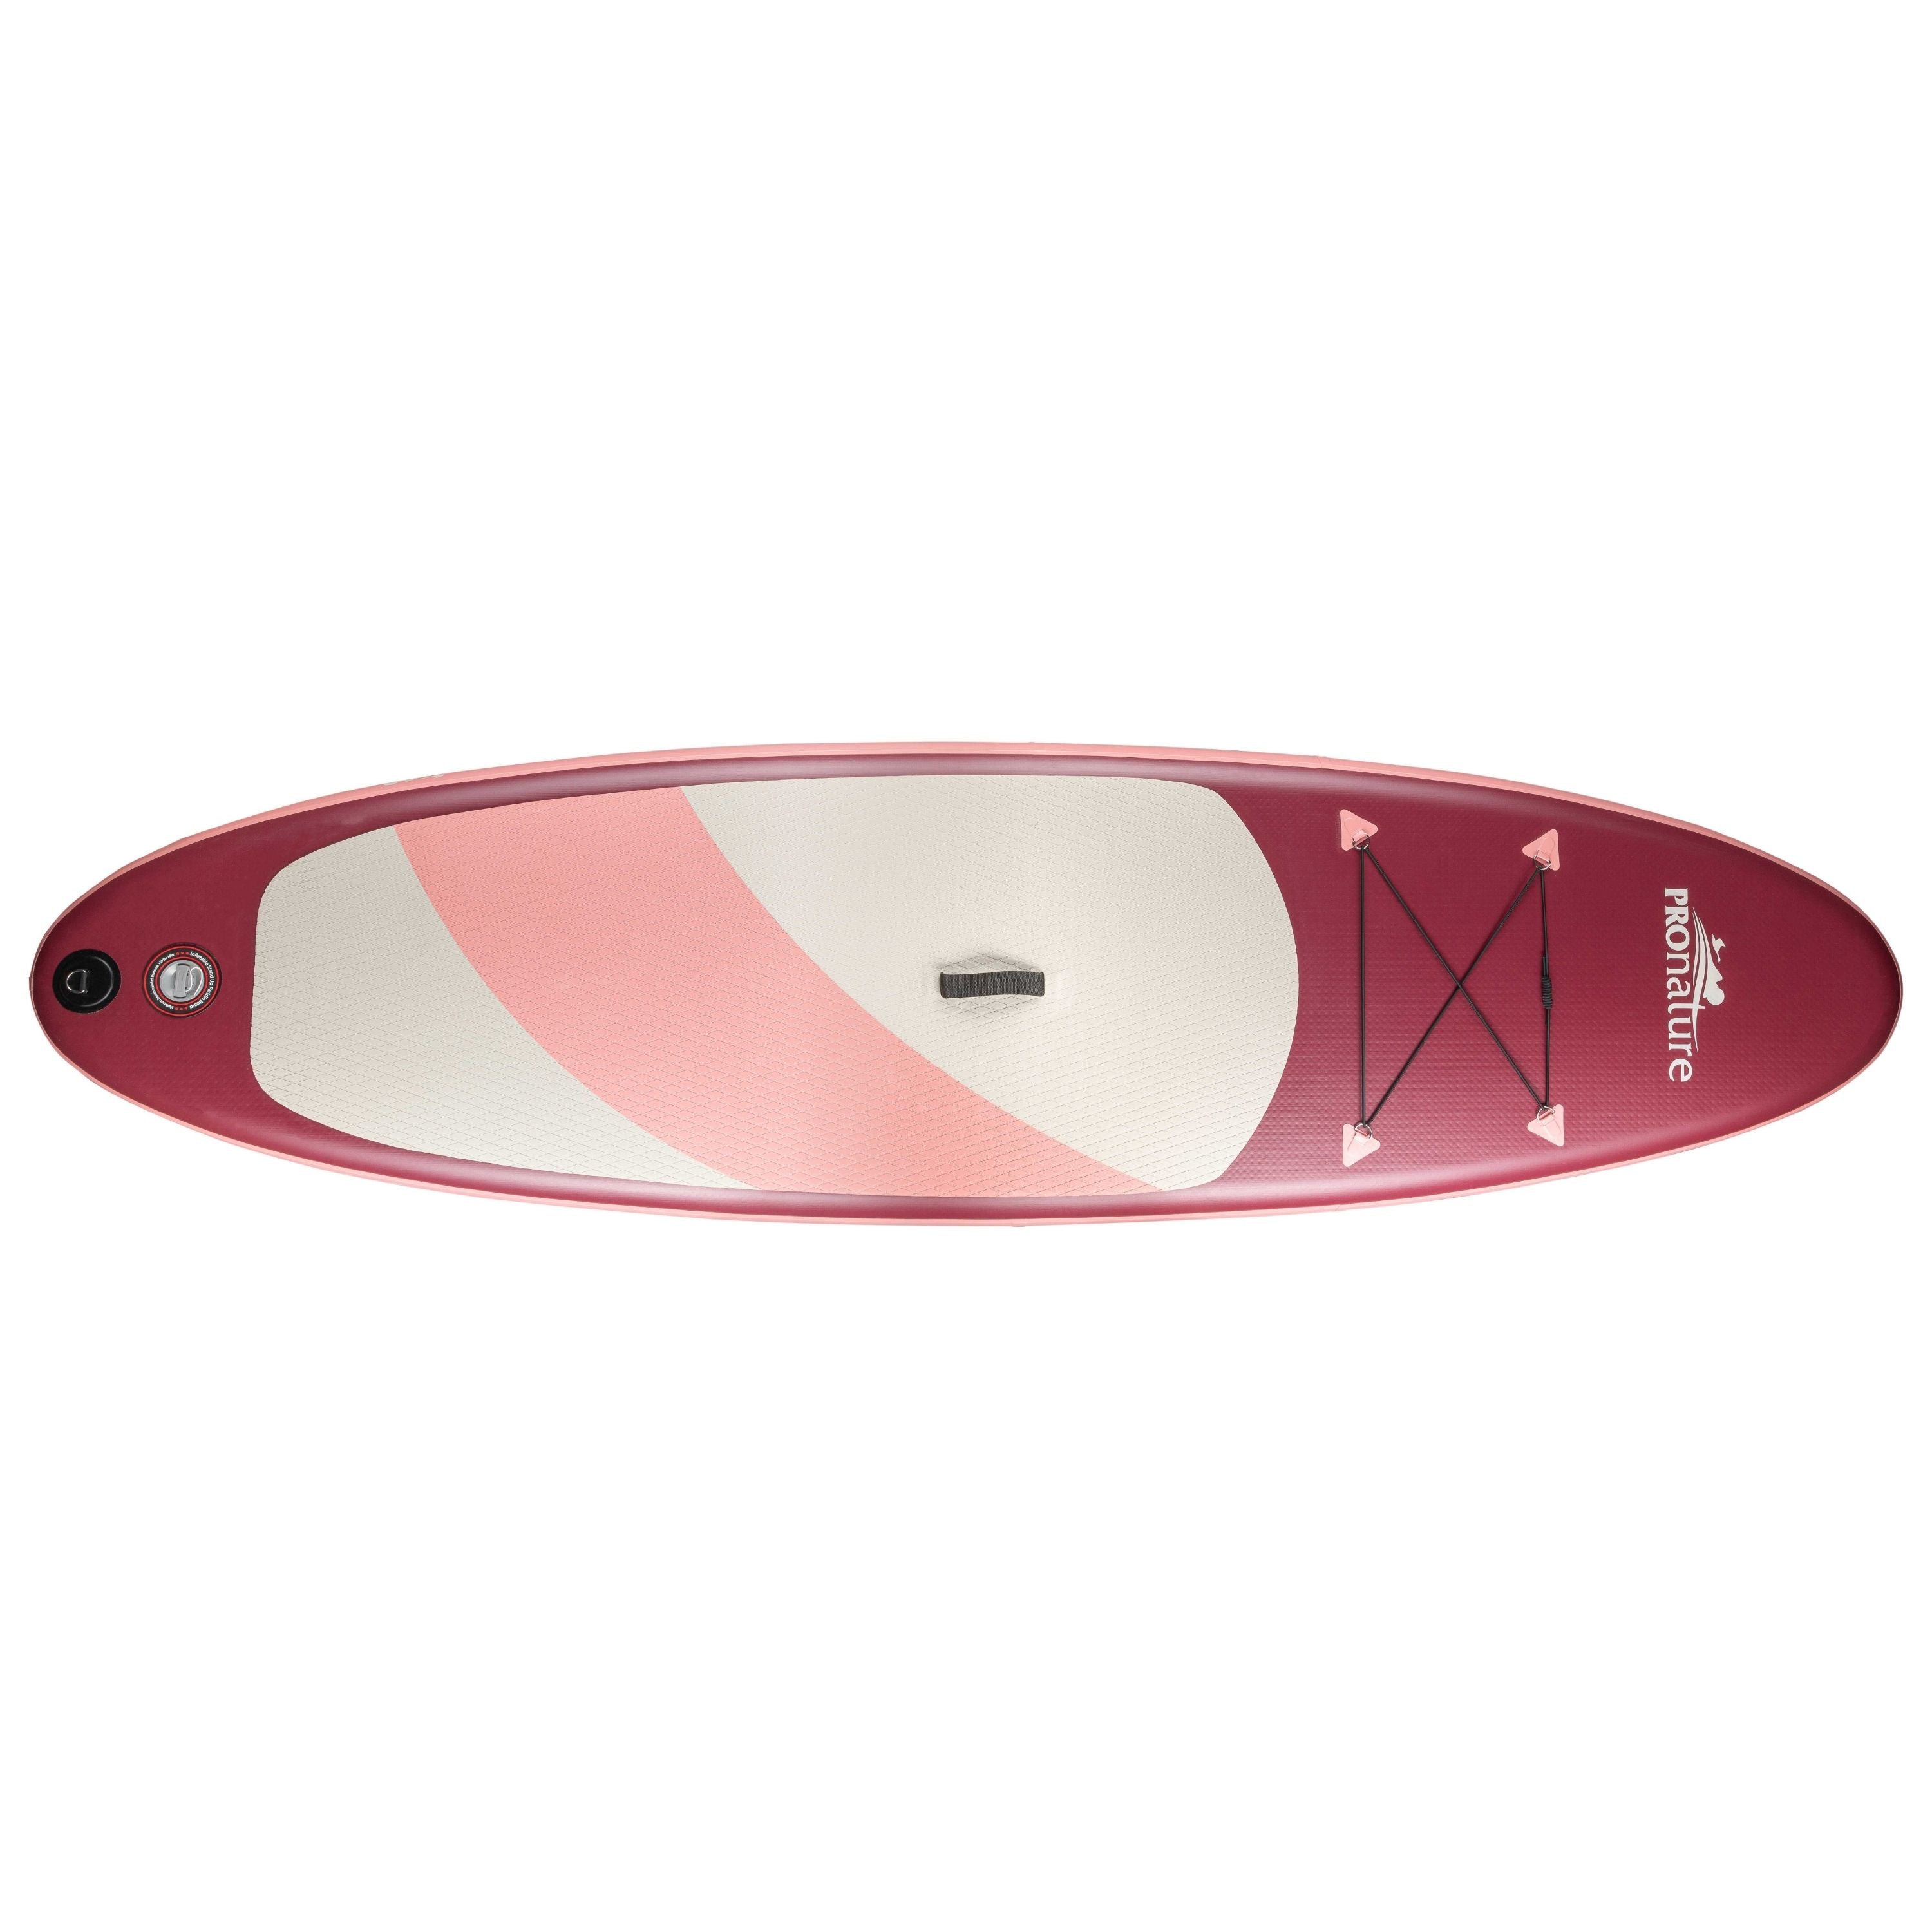 Inflatable paddle board - Pink